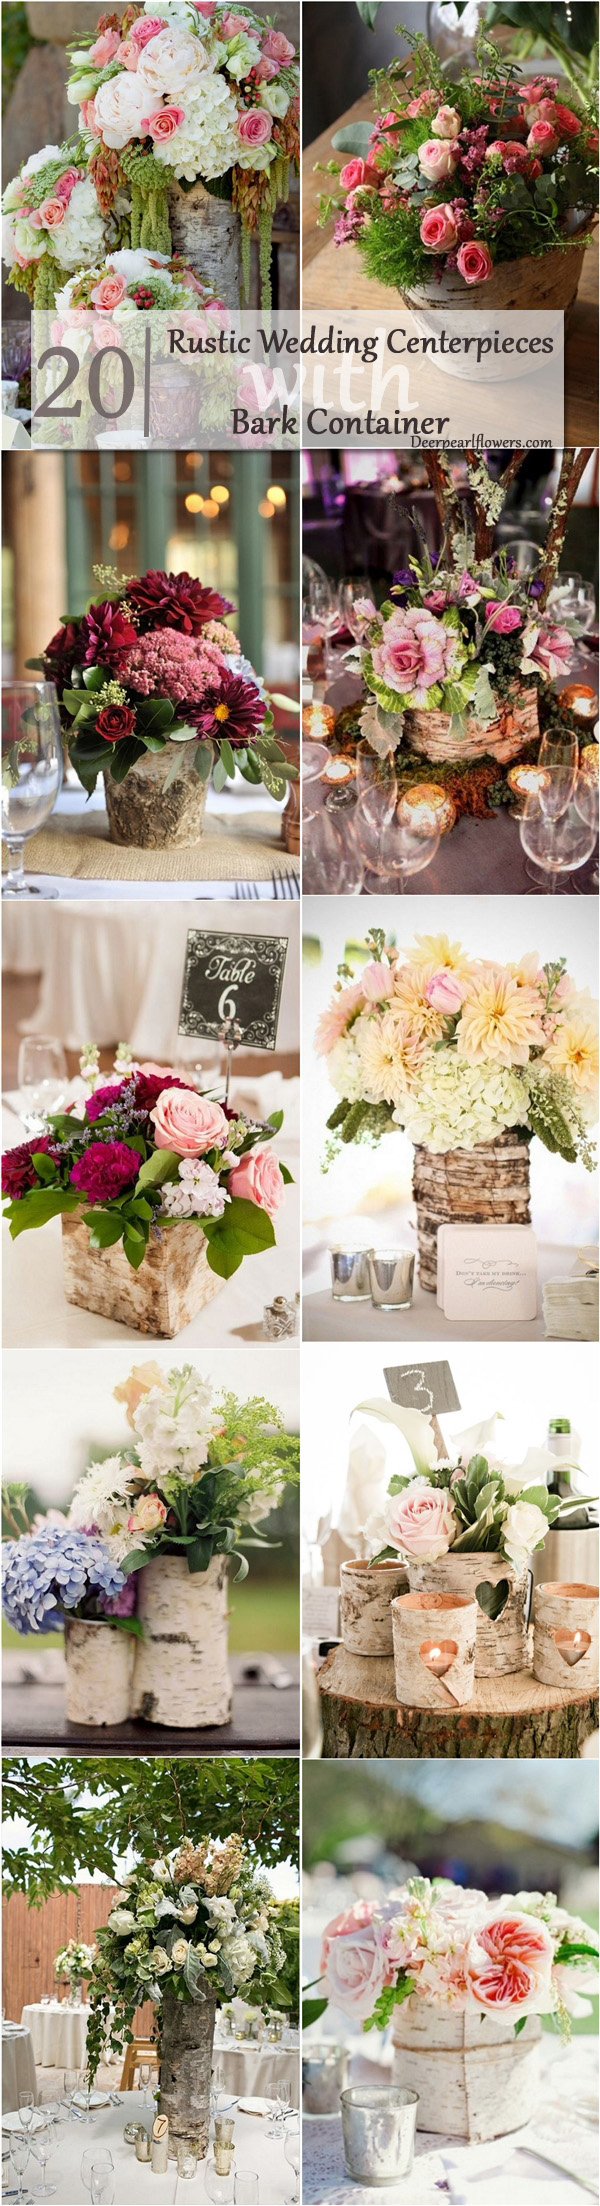 Rustic Country Bark Container Wedding Centerpieces